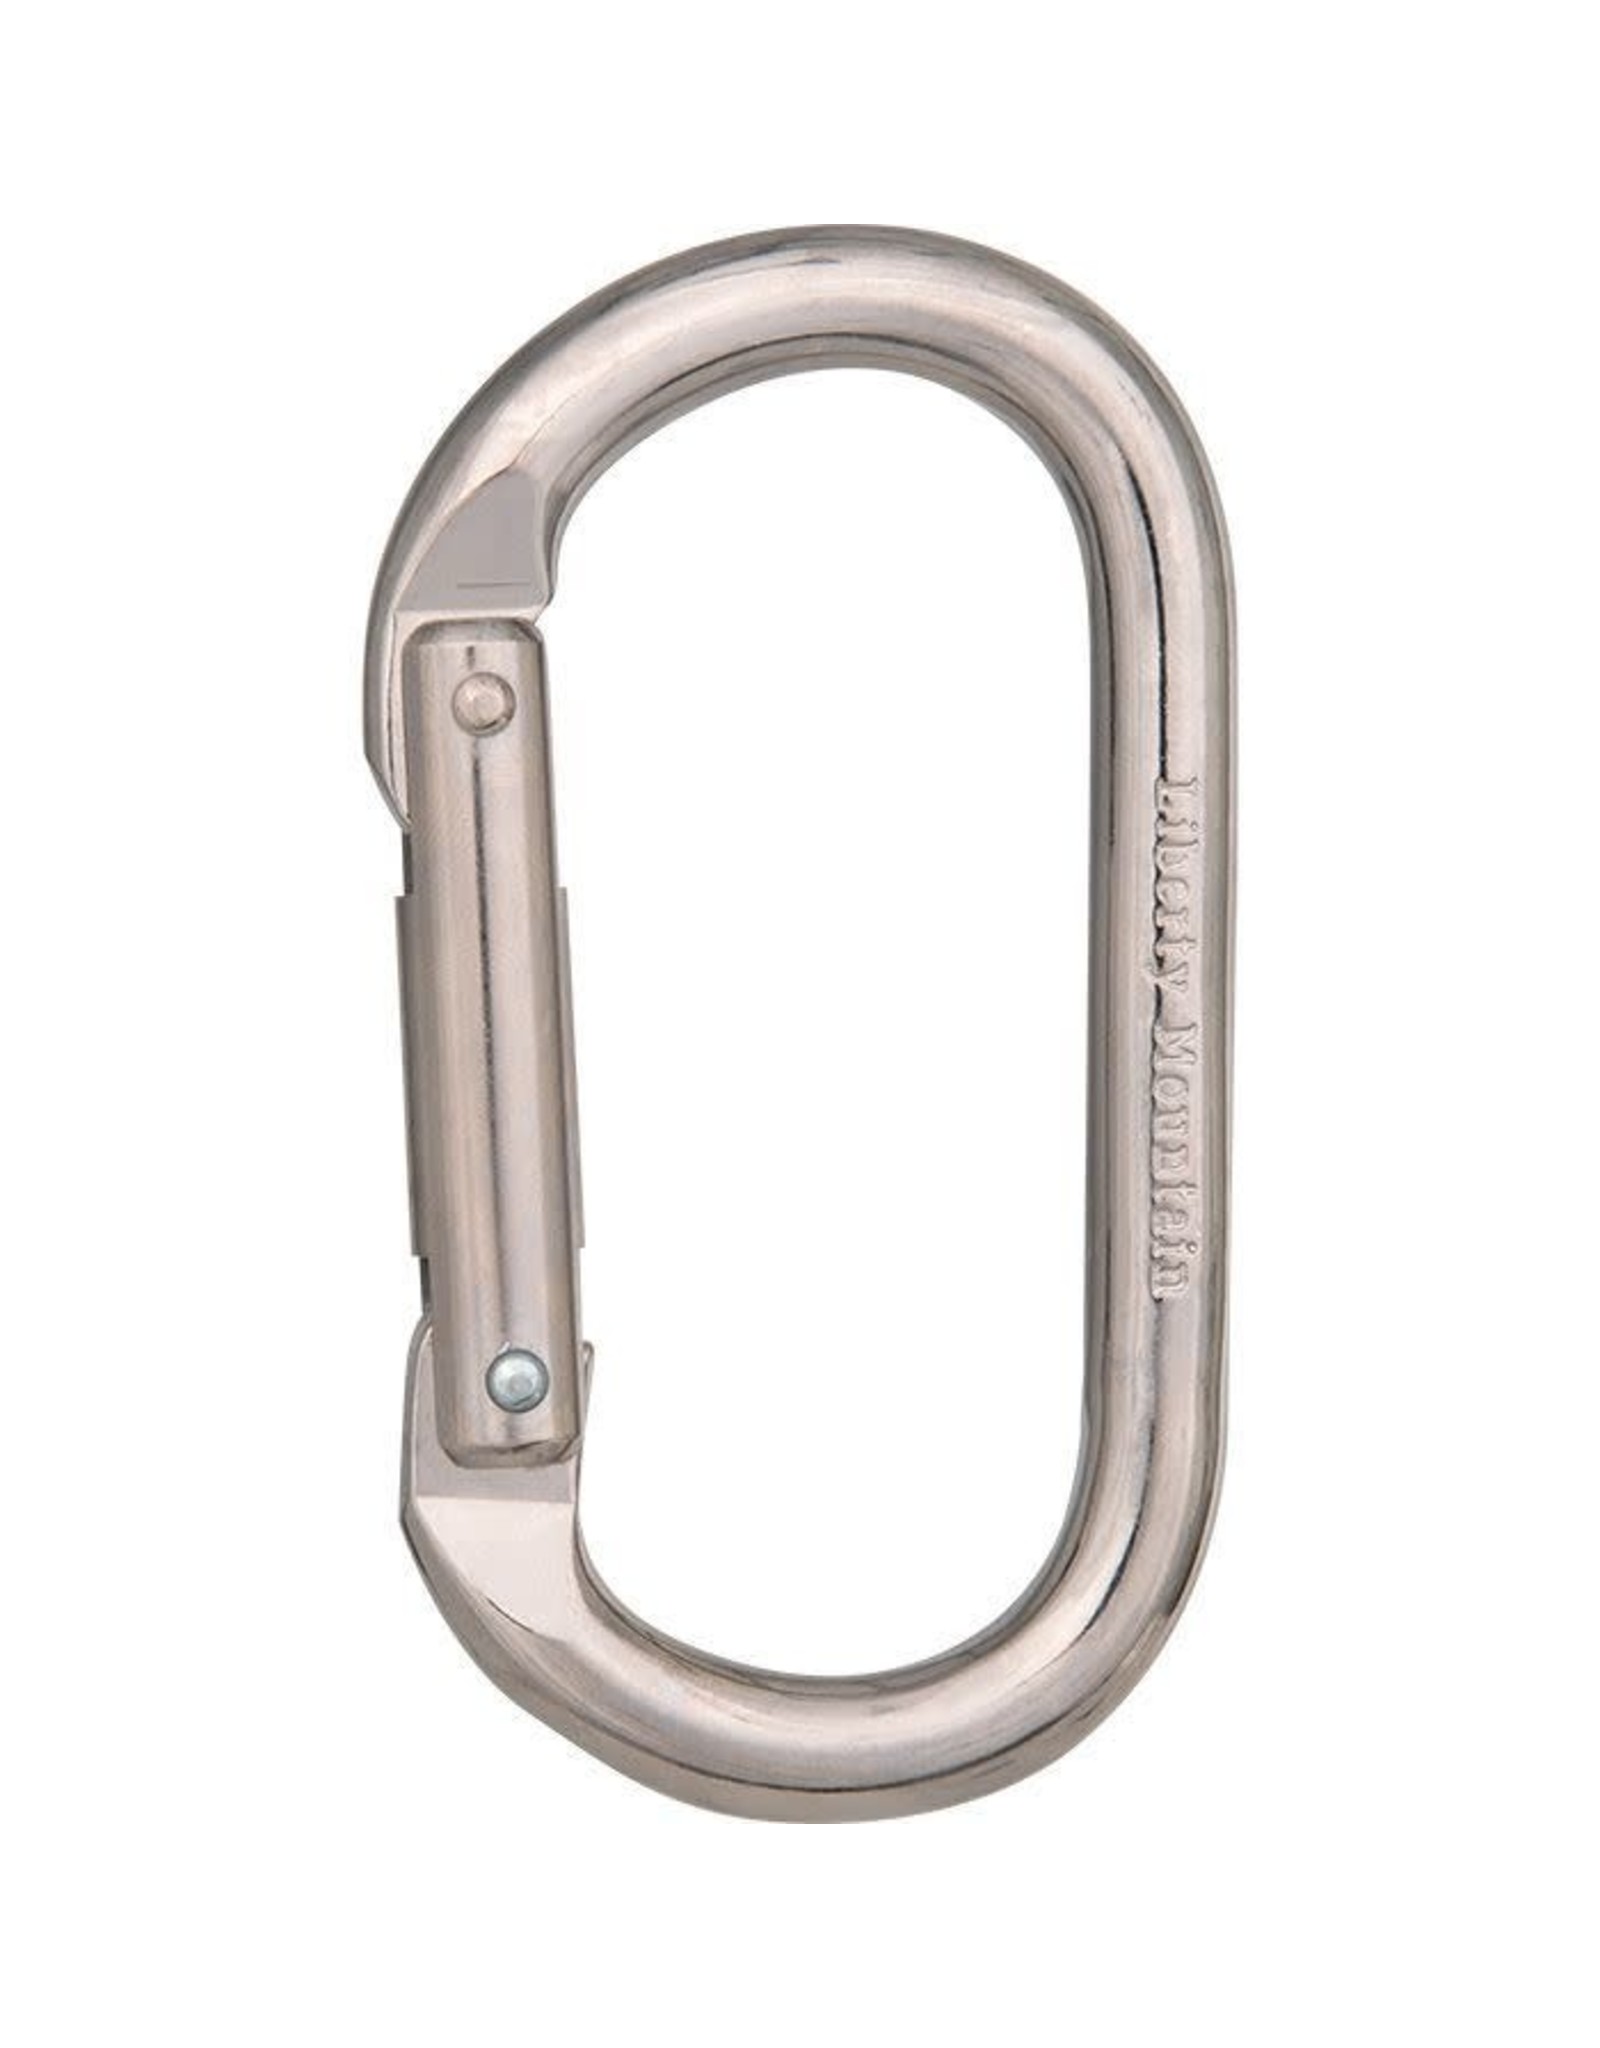 CYPHER Cypher Classic Steel Oval Carabiner